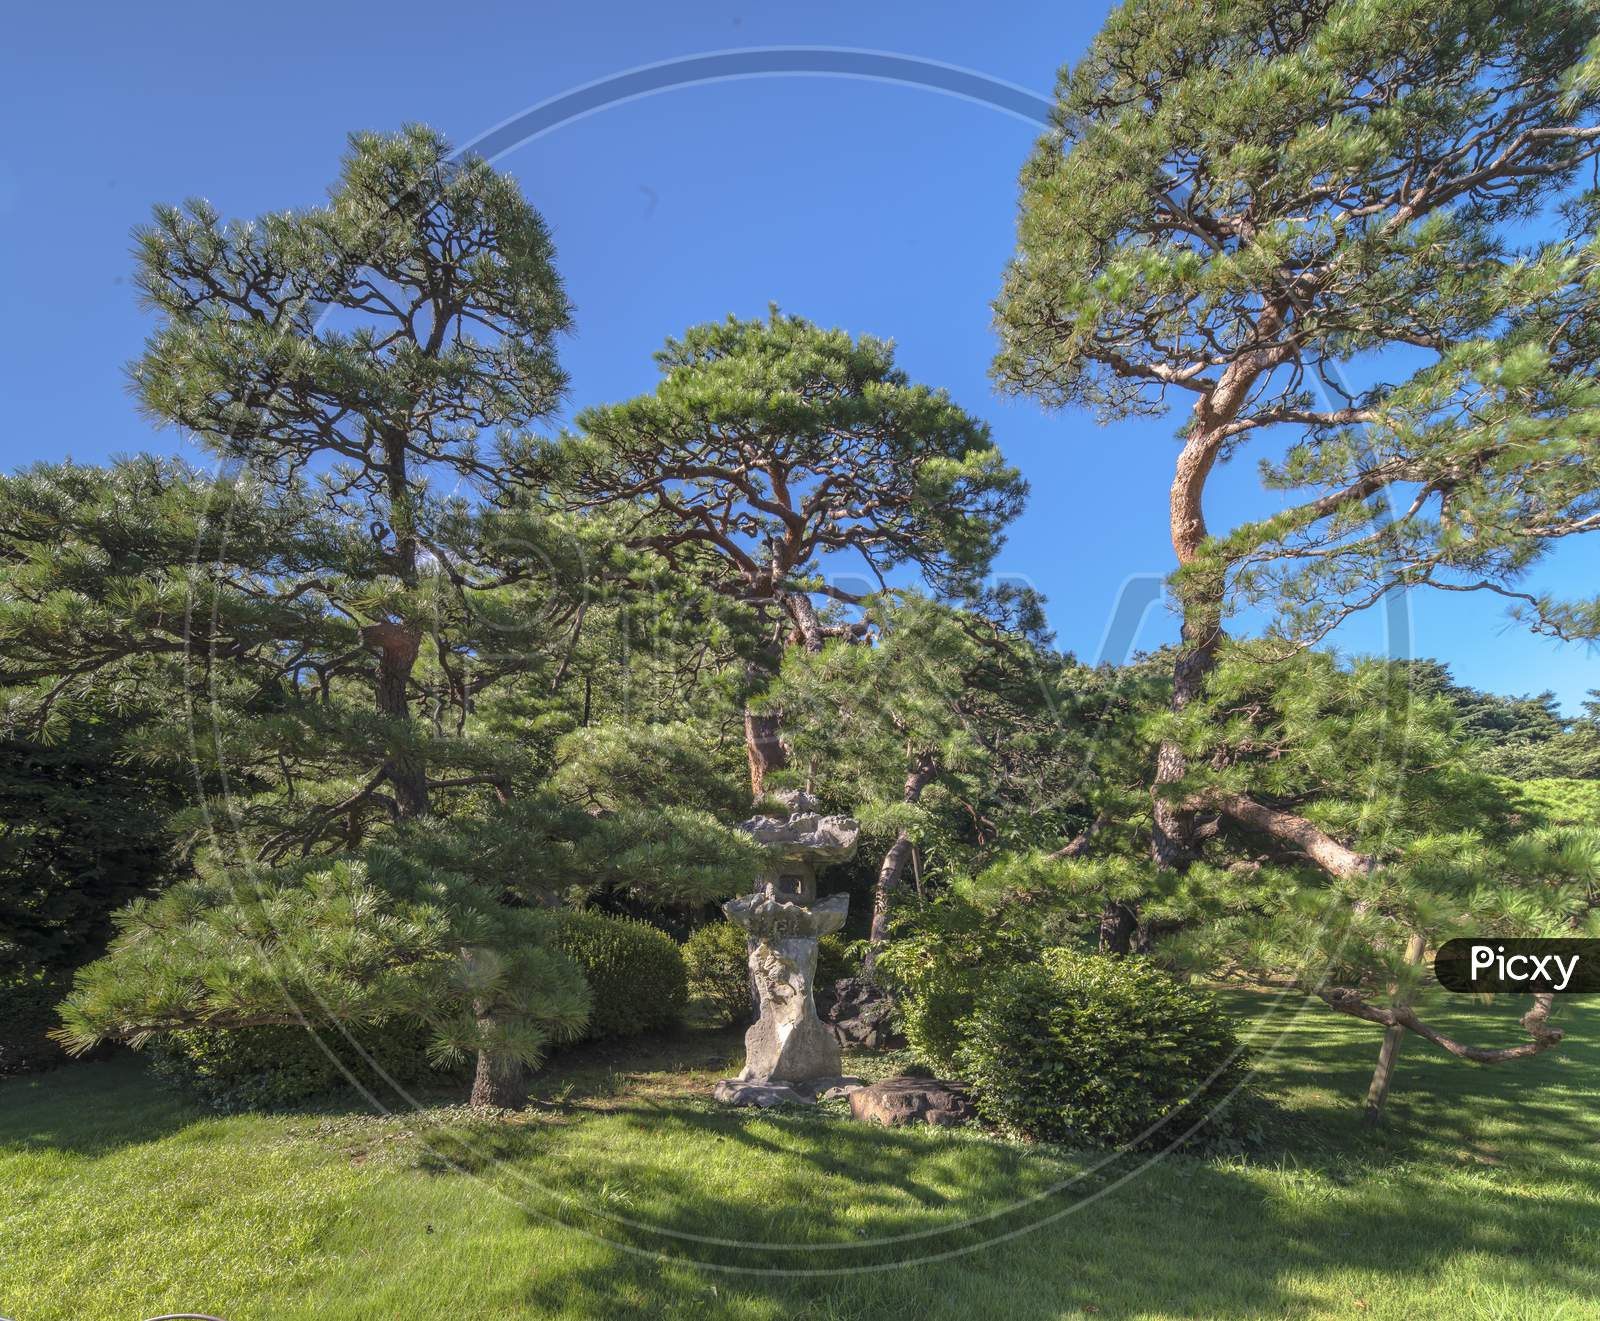 Green Lawn And Rounded Stone Lantern Under Pines Trees And Blue Sky In Shinjuku Gyoen Garden In Tokyo, Japan.